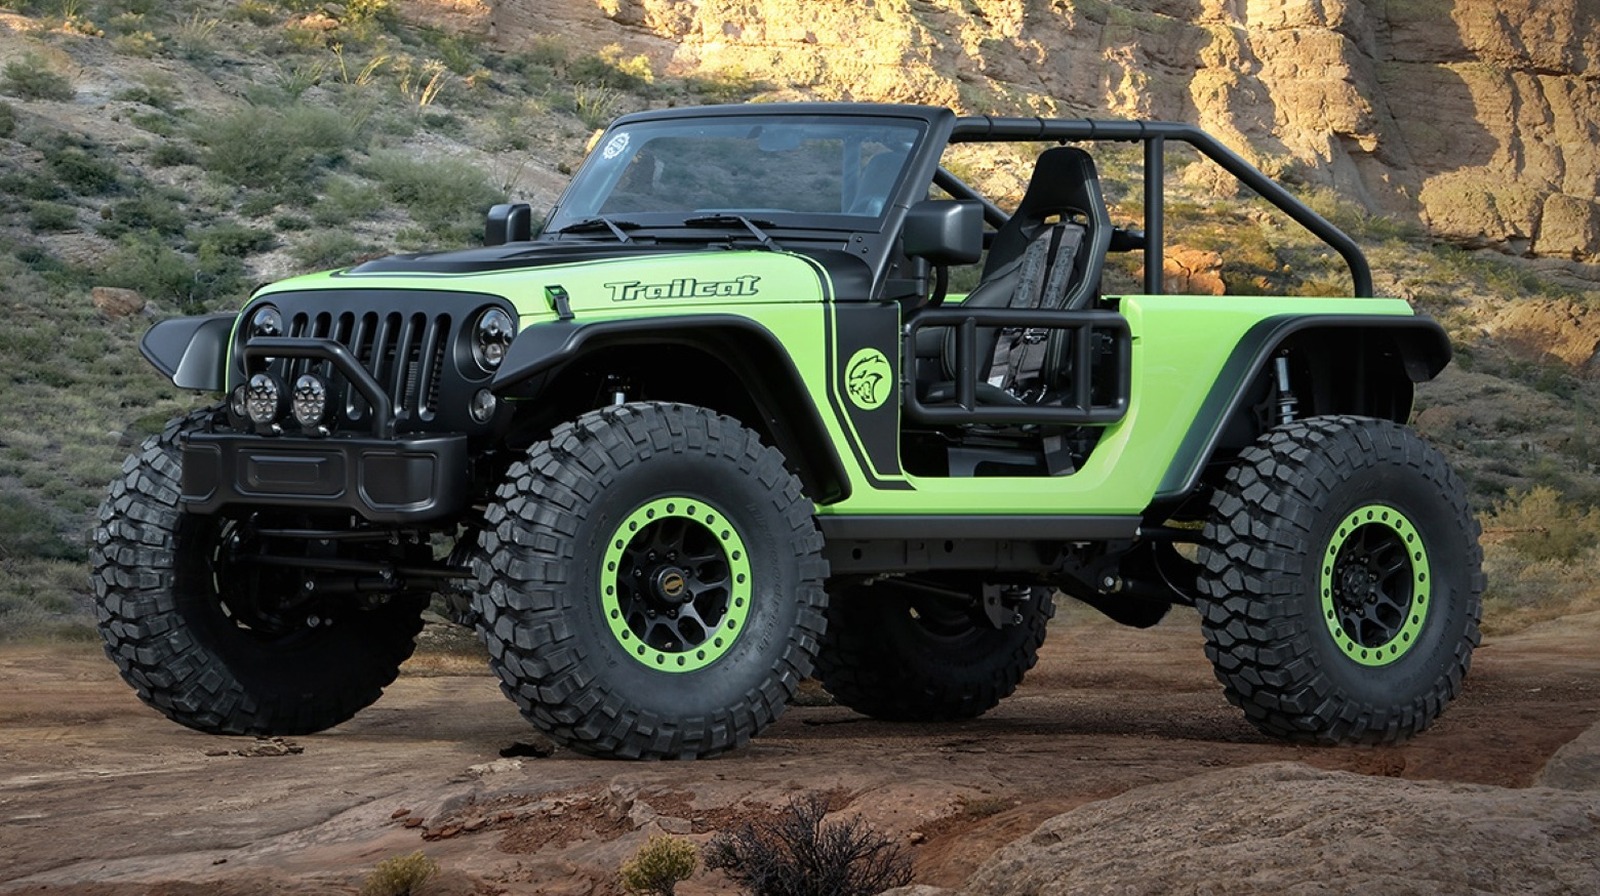 Chrysler Built The Hellcat Powered Jeep Wrangler Everybody Wanted, But  Never Sold It